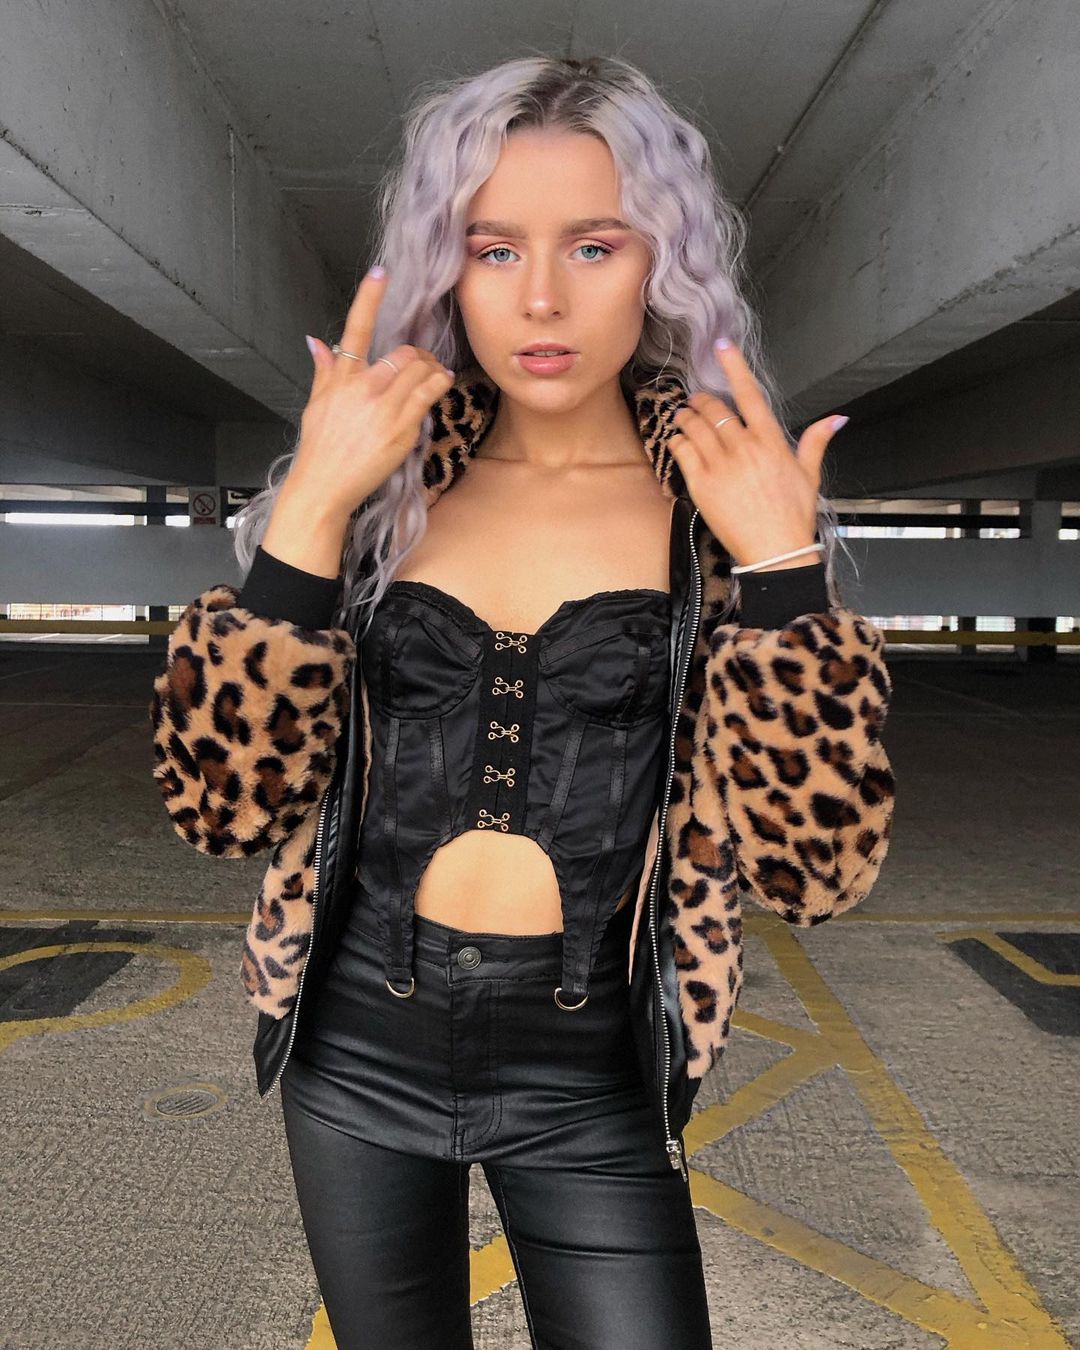 Leopard print jacket from go check out their page and give them a follow Use m 3